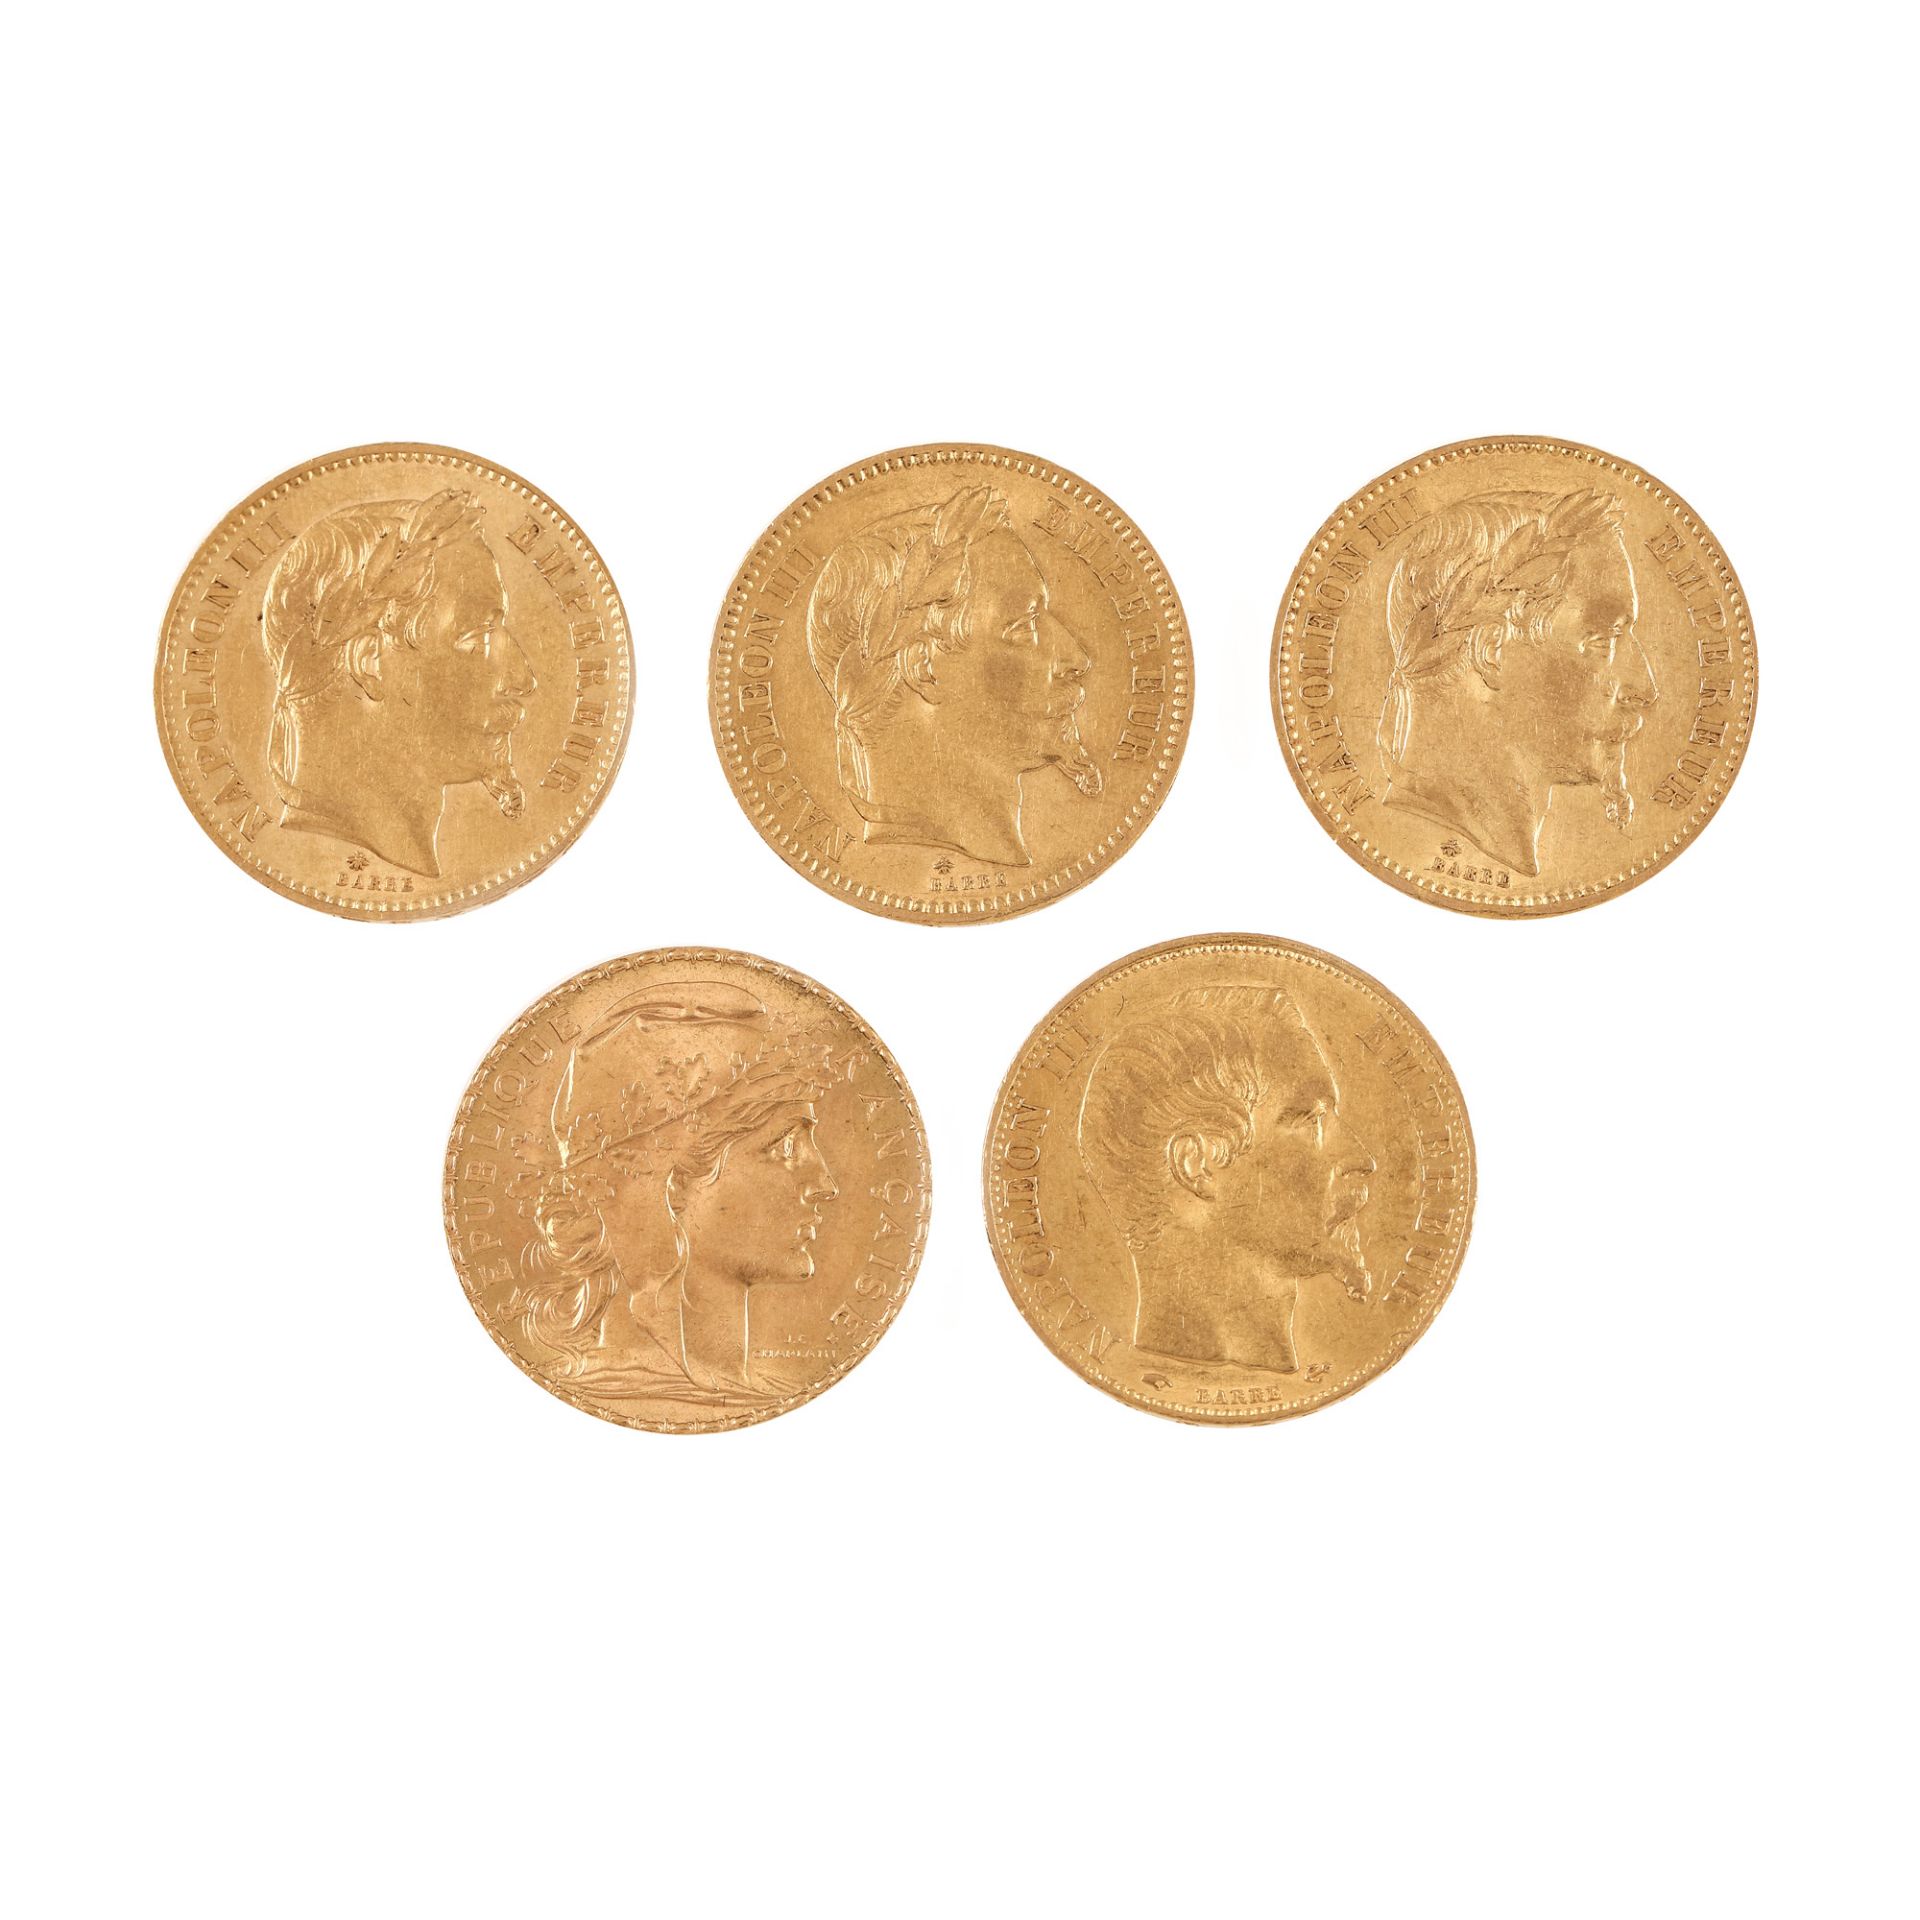 5 gold coins, 20 Francs, France, Empire and the 3rd Republic